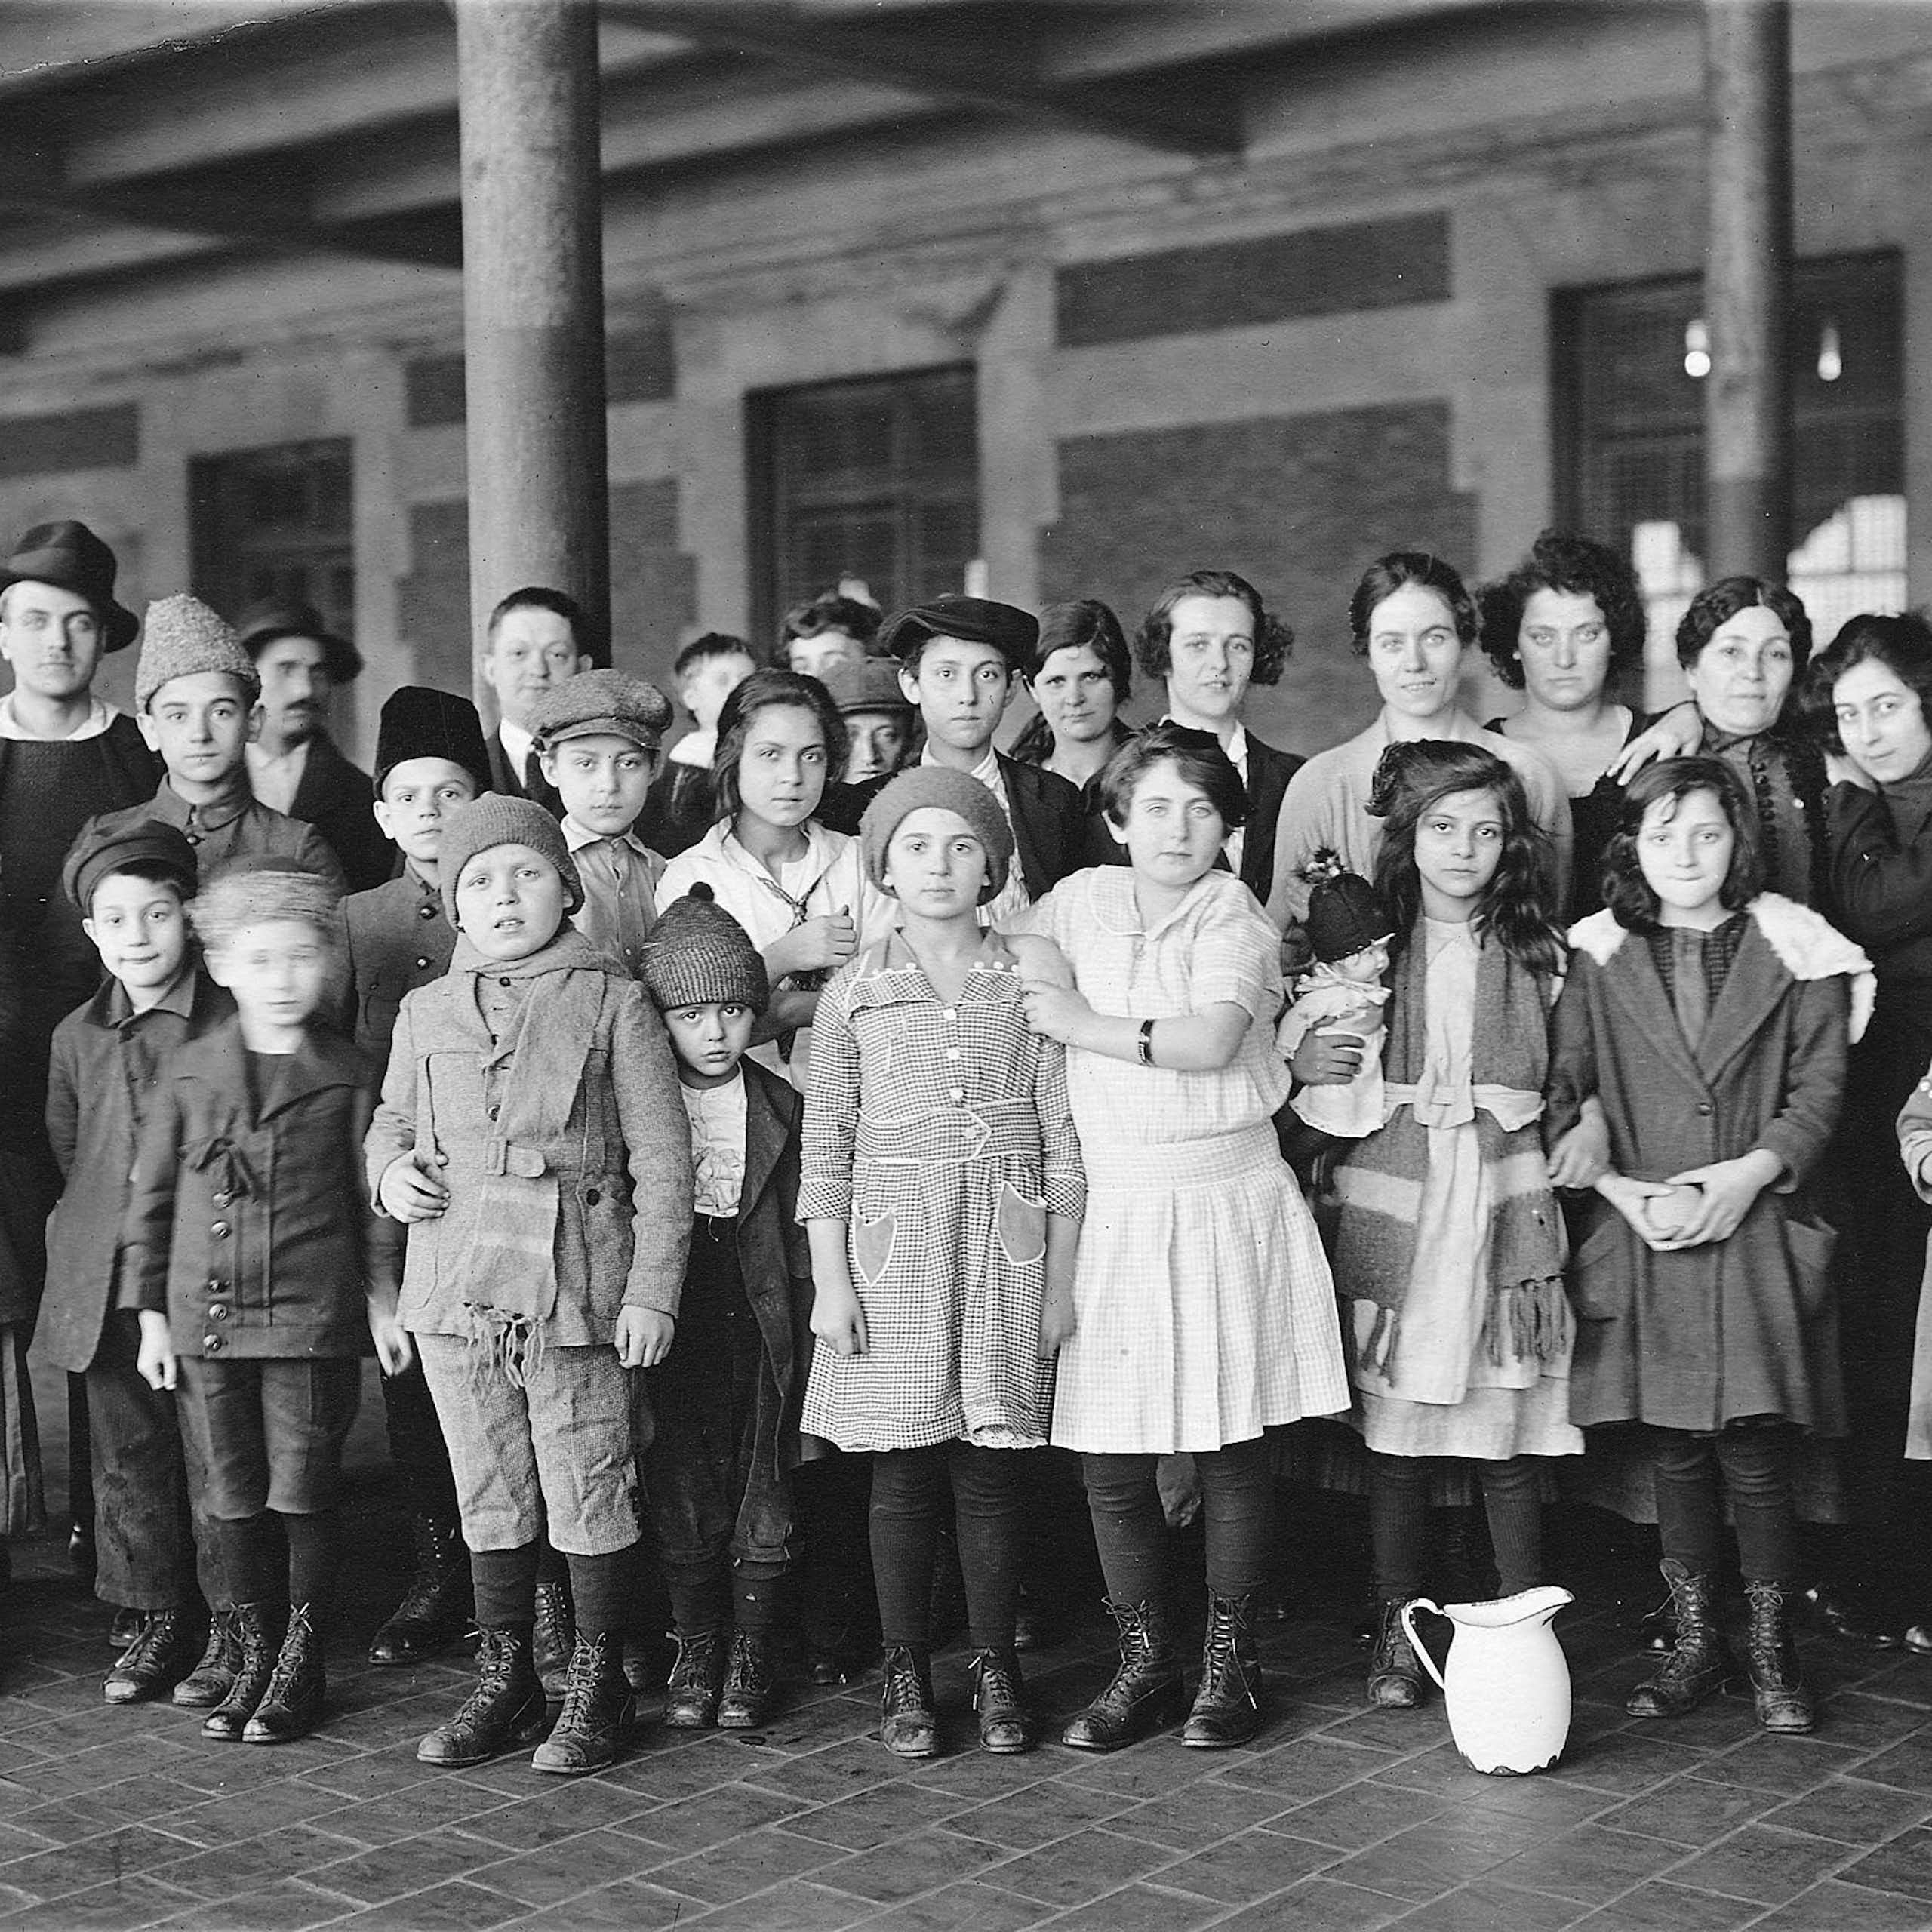 Three rows of children and young adults stand formally as they pose in a courtyard.